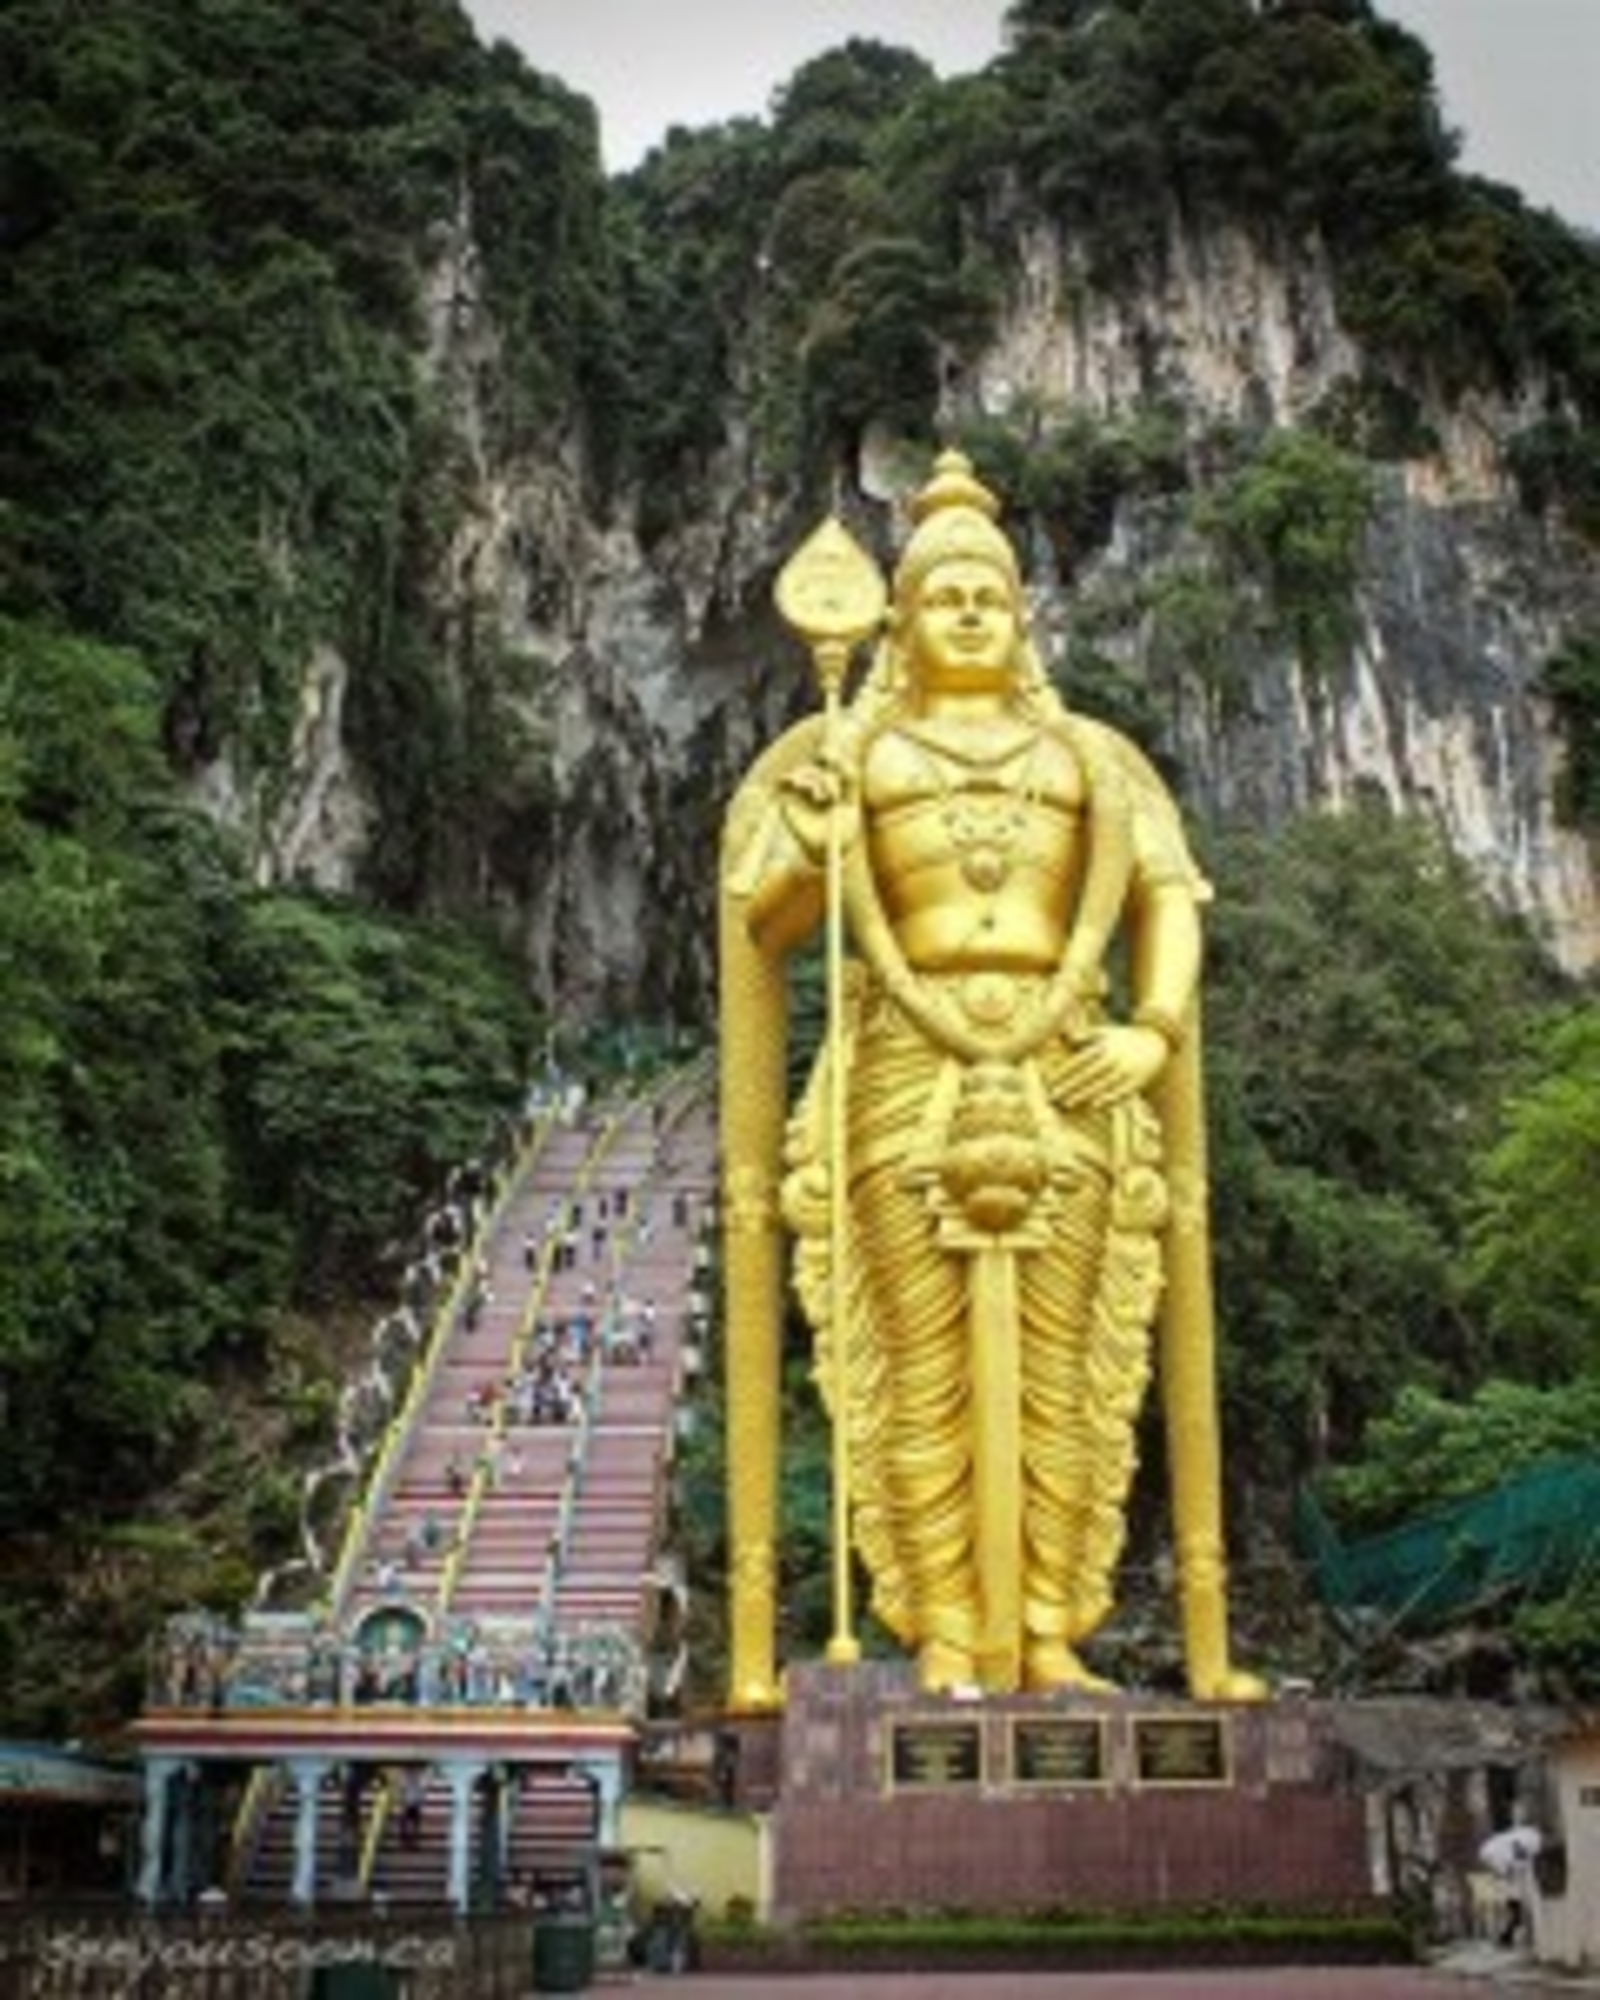 Gold statue of Lord Murugan in front of stairs leading up into the Batu Caves Temple